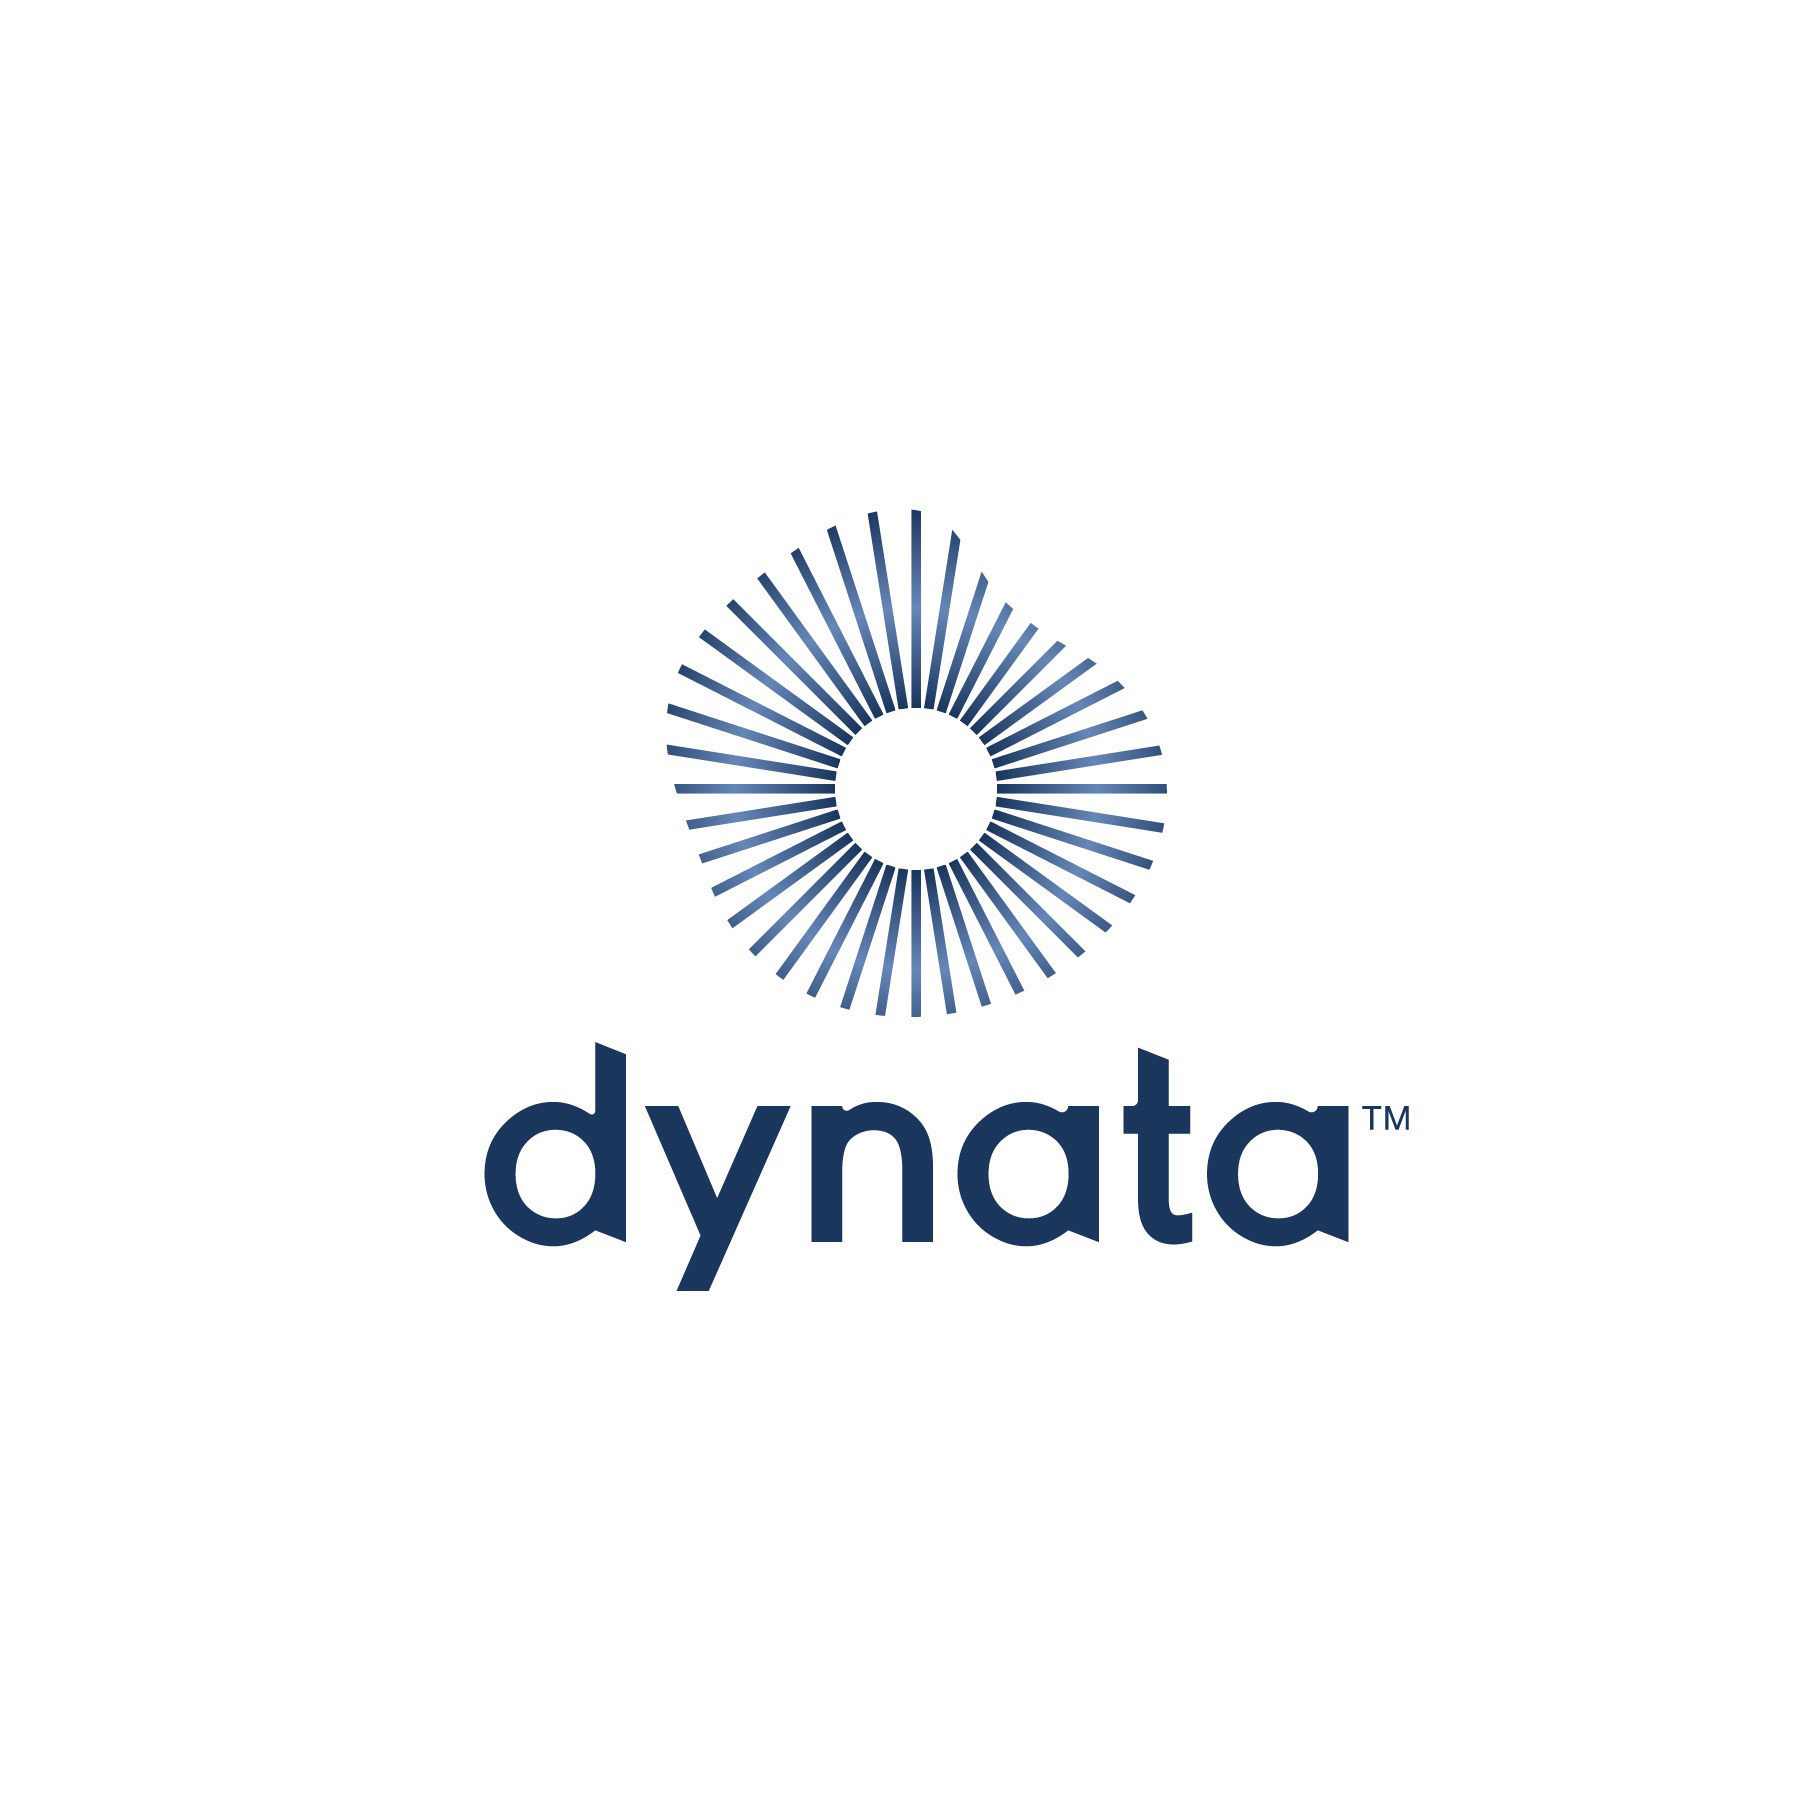 Dynata vigorously refutes Moody's factual inaccuracies and misclassification of credit rating